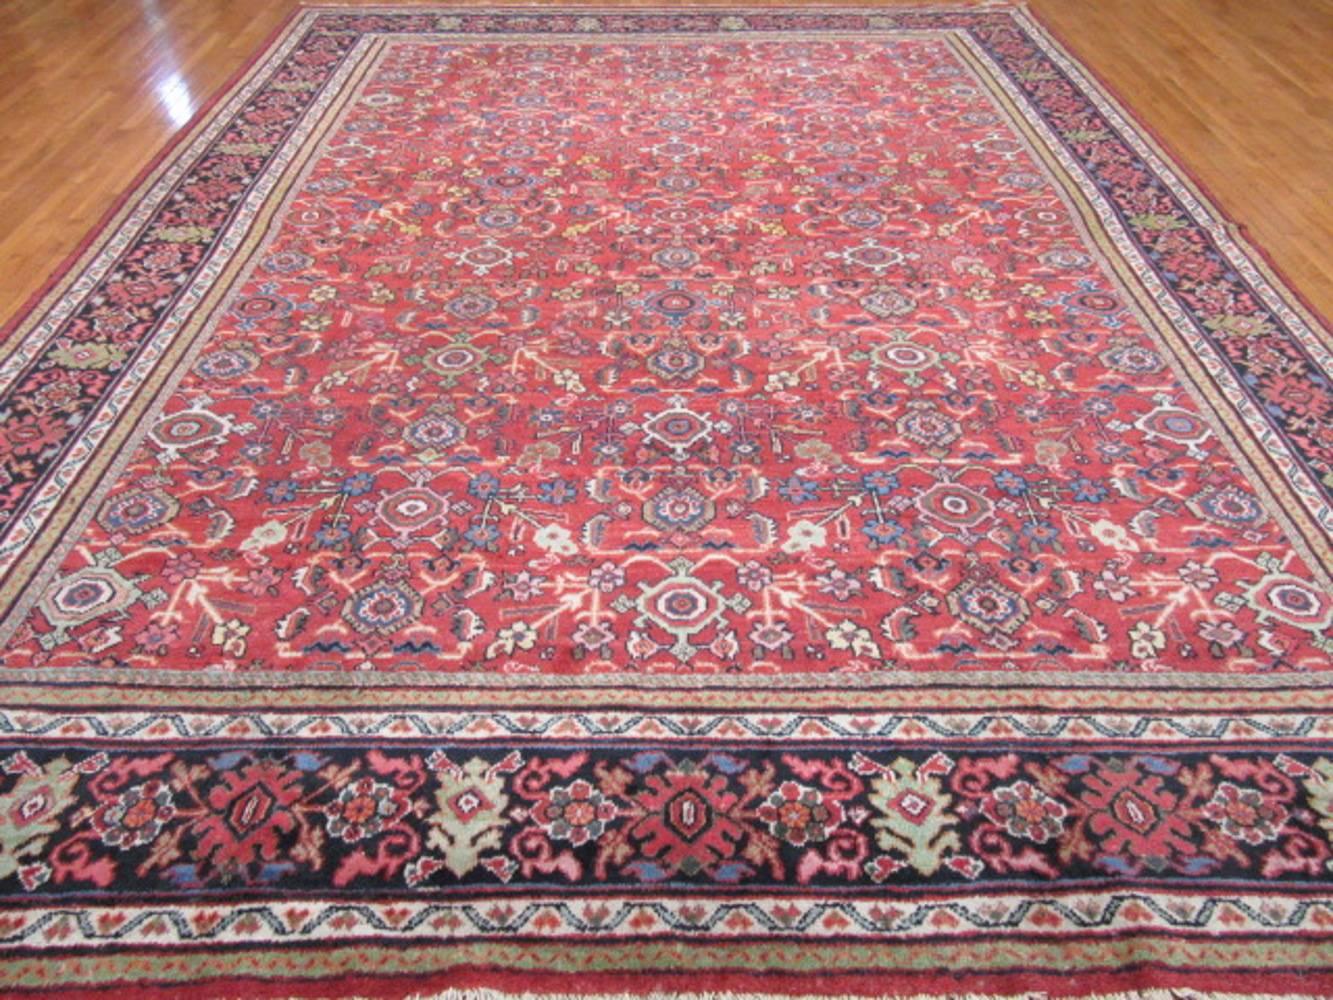 This is an antique Persian Mahal rug with an all-over pattern hand-knotted with wool colored with all natural dyes. Mahal rugs have been a sought after type of rug from the western mountain region of Iran. Antique Mahals are very easy rugs to work